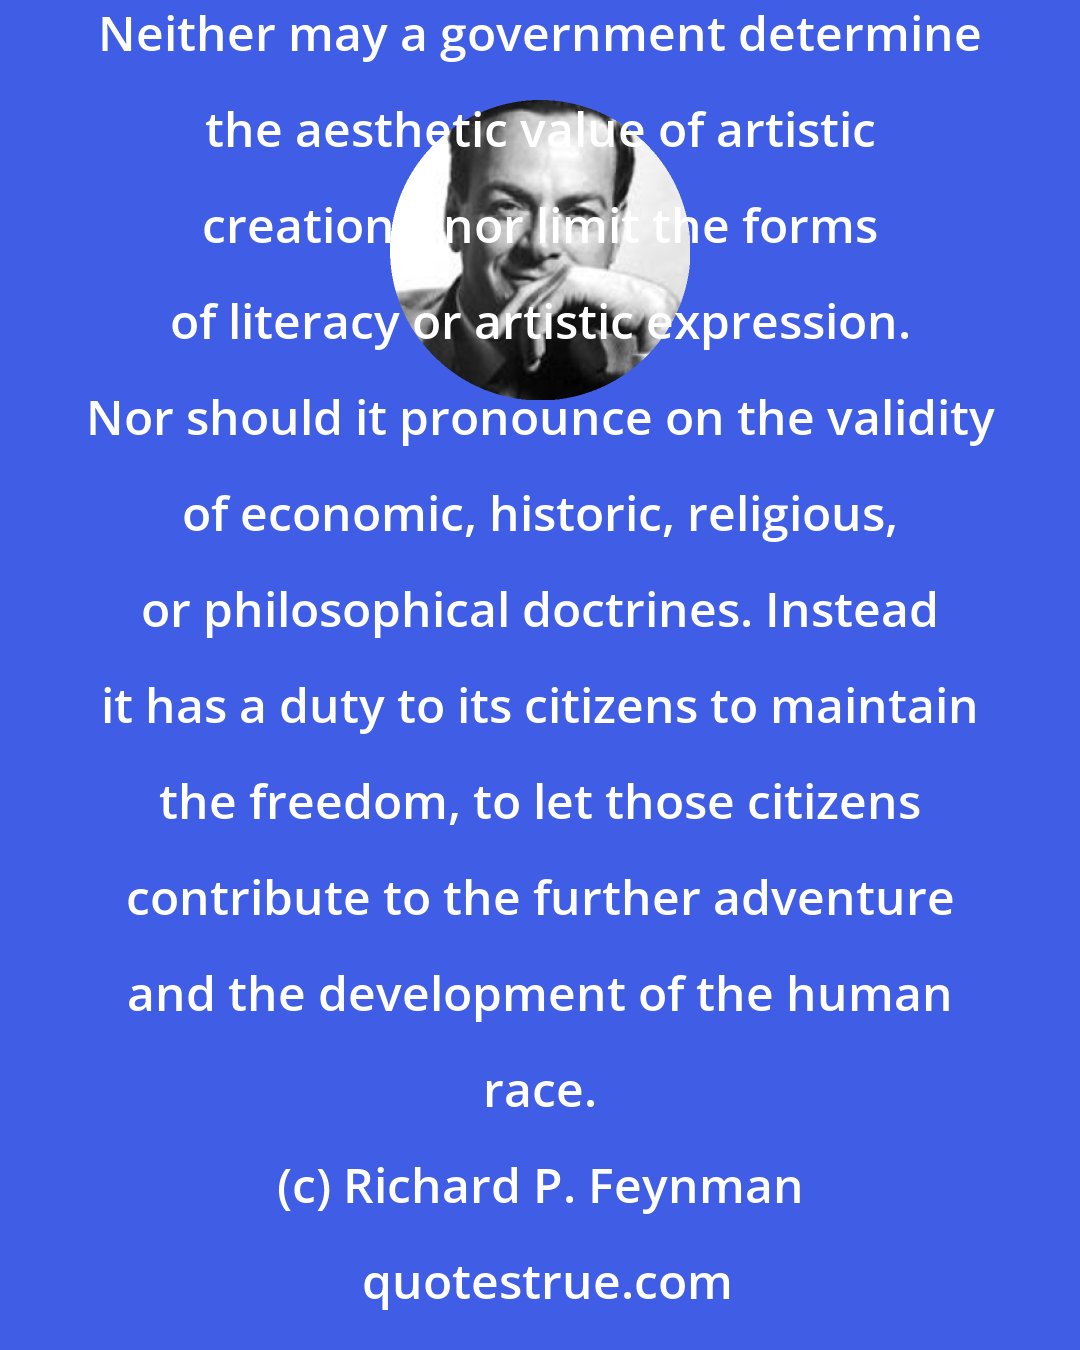 Richard P. Feynman: No government has the right to decide on the truth of scientific principles, nor to prescribe in any way the character of the questions investigated. Neither may a government determine the aesthetic value of artistic creations, nor limit the forms of literacy or artistic expression. Nor should it pronounce on the validity of economic, historic, religious, or philosophical doctrines. Instead it has a duty to its citizens to maintain the freedom, to let those citizens contribute to the further adventure and the development of the human race.